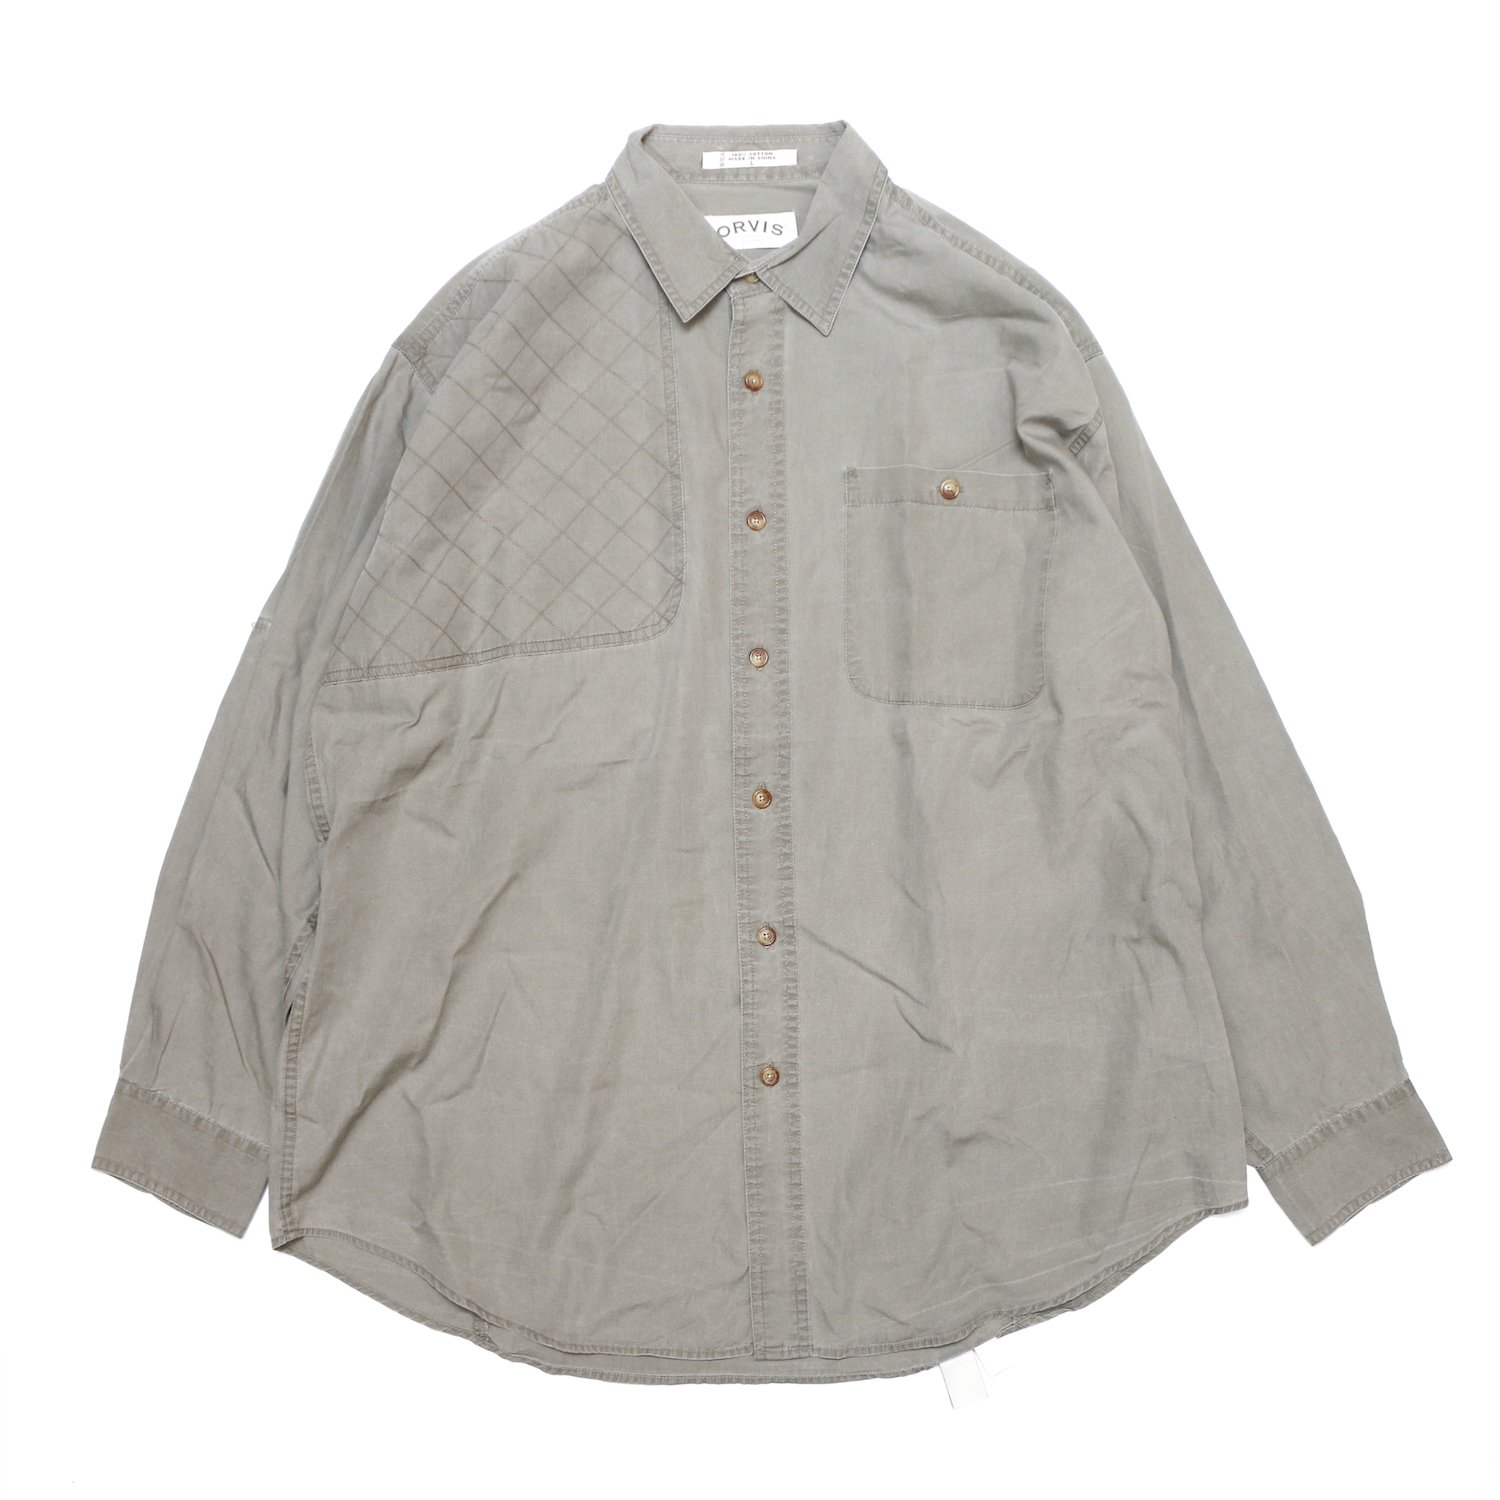 <img class='new_mark_img1' src='https://img.shop-pro.jp/img/new/icons8.gif' style='border:none;display:inline;margin:0px;padding:0px;width:auto;' />Vintage Clothes / 2000's Shirt